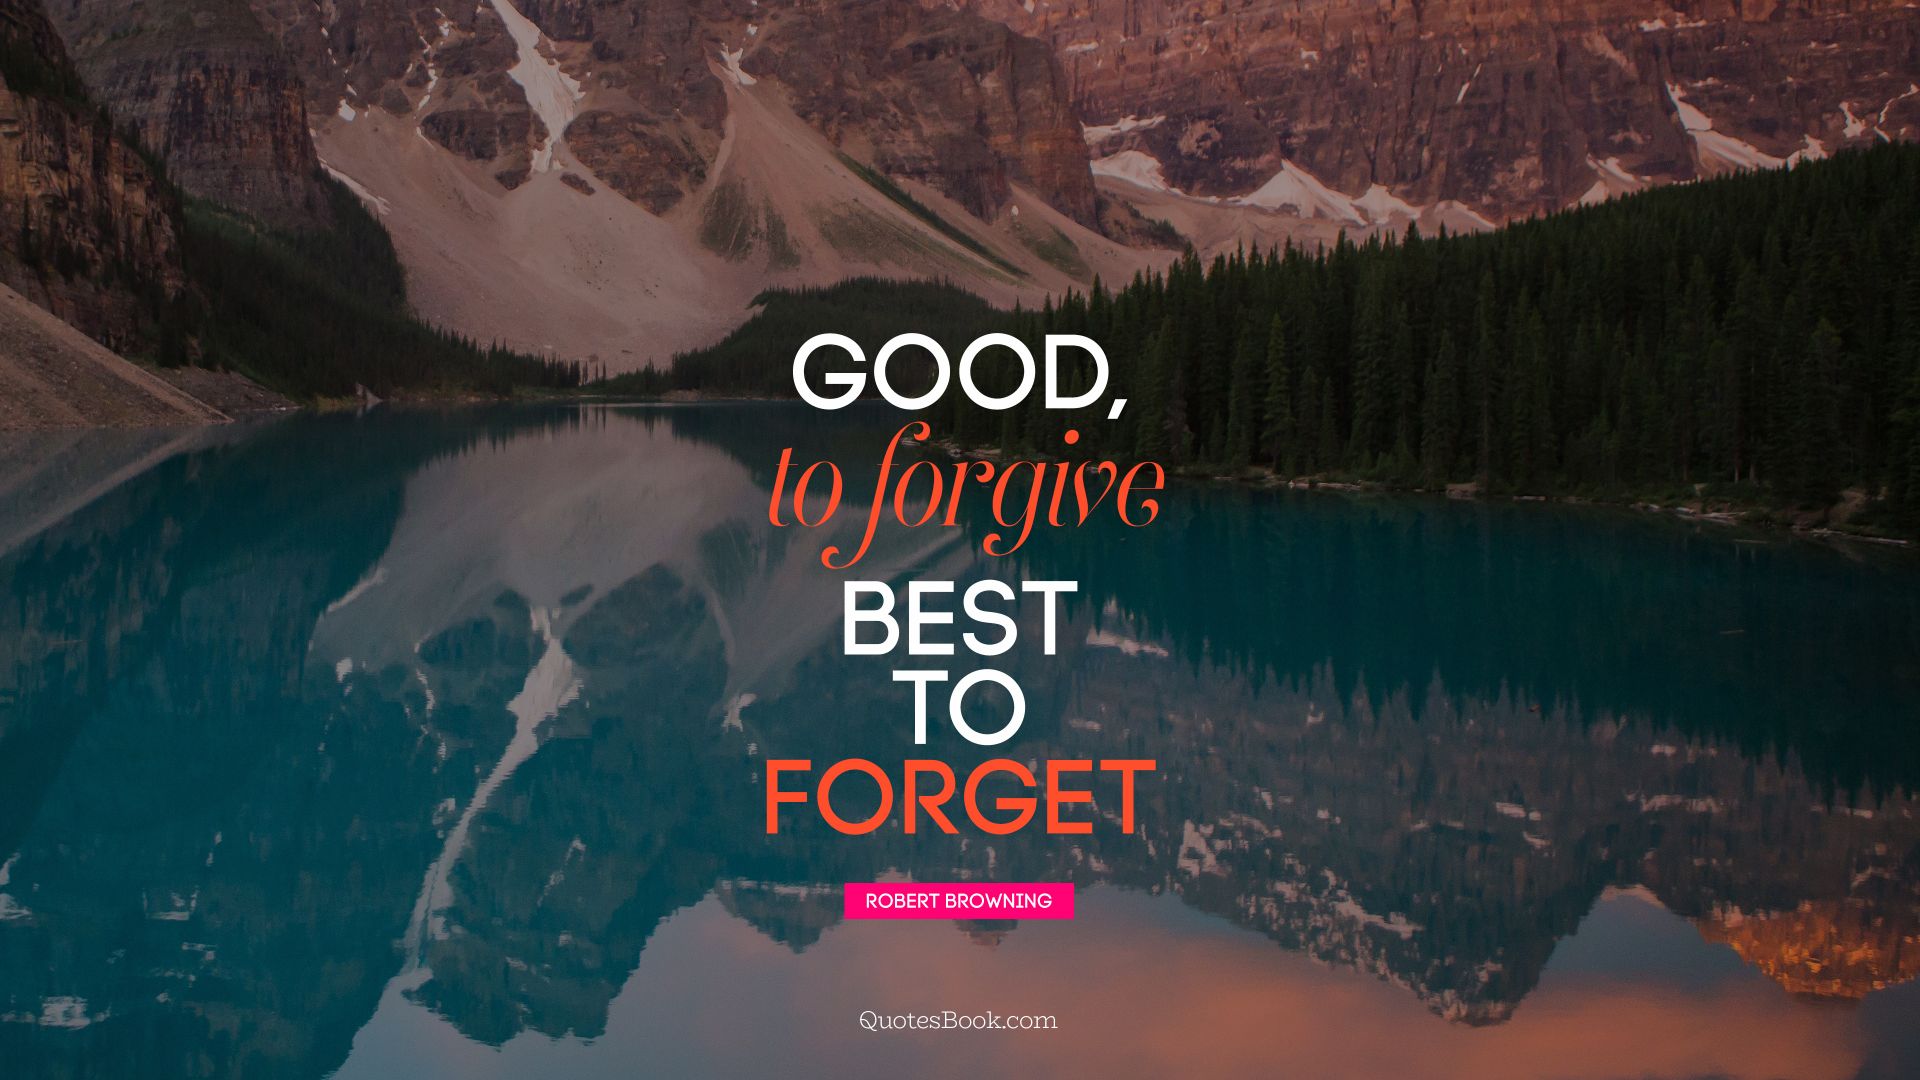 Good, to forgive Best to forget. - Quote by Robert Browning